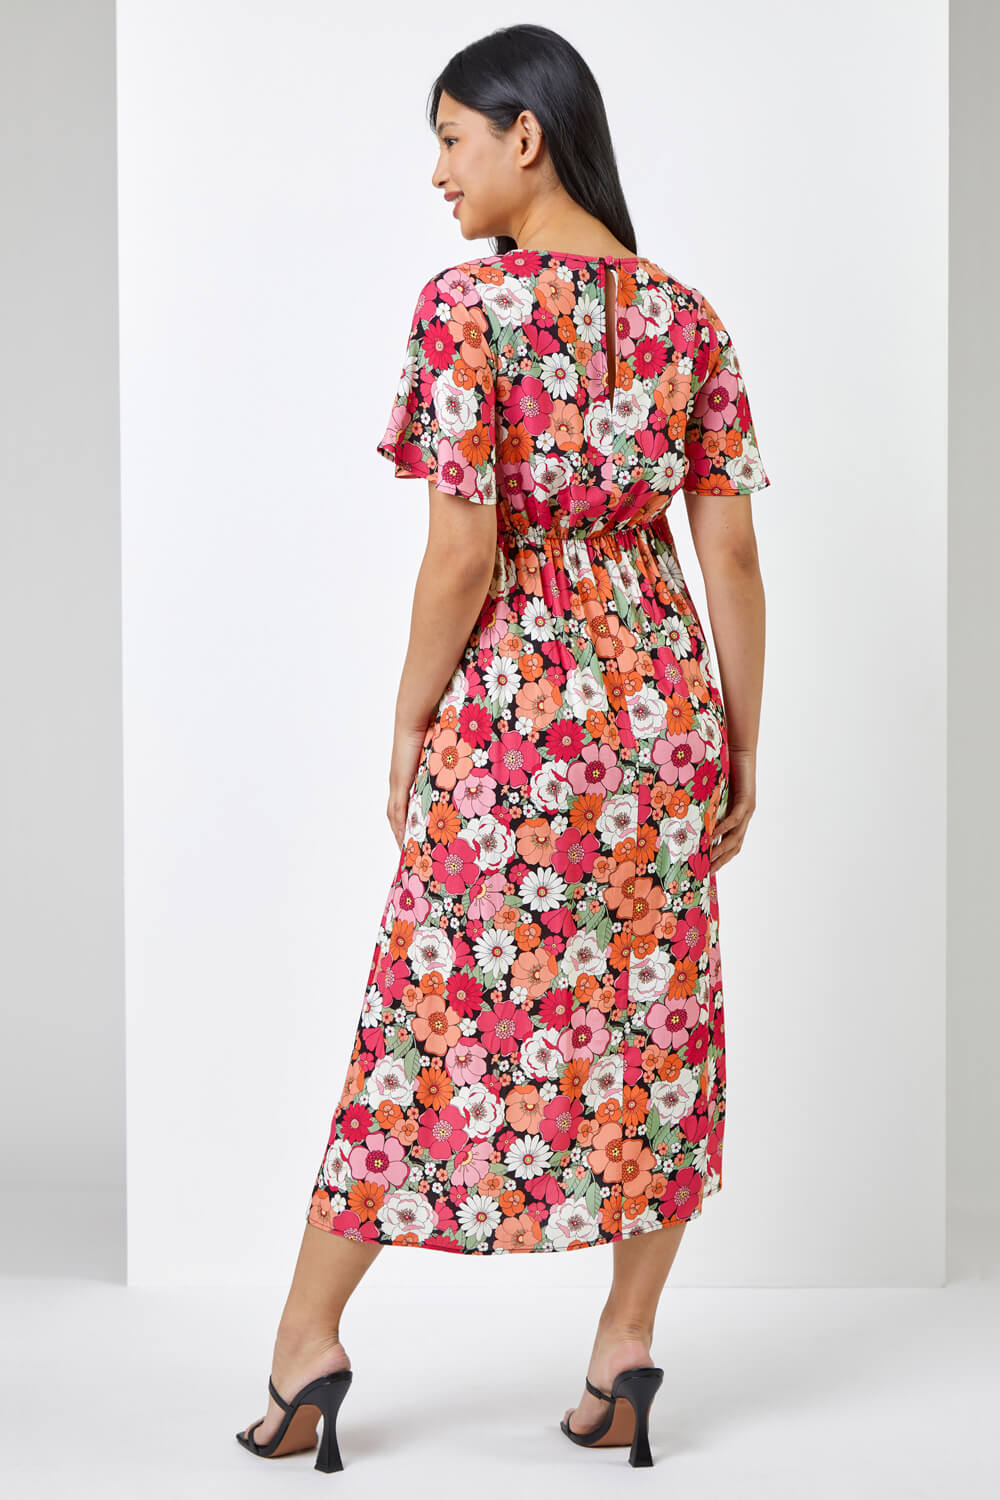 CORAL Petite Floral Print Flute Sleeve Dress, Image 2 of 5